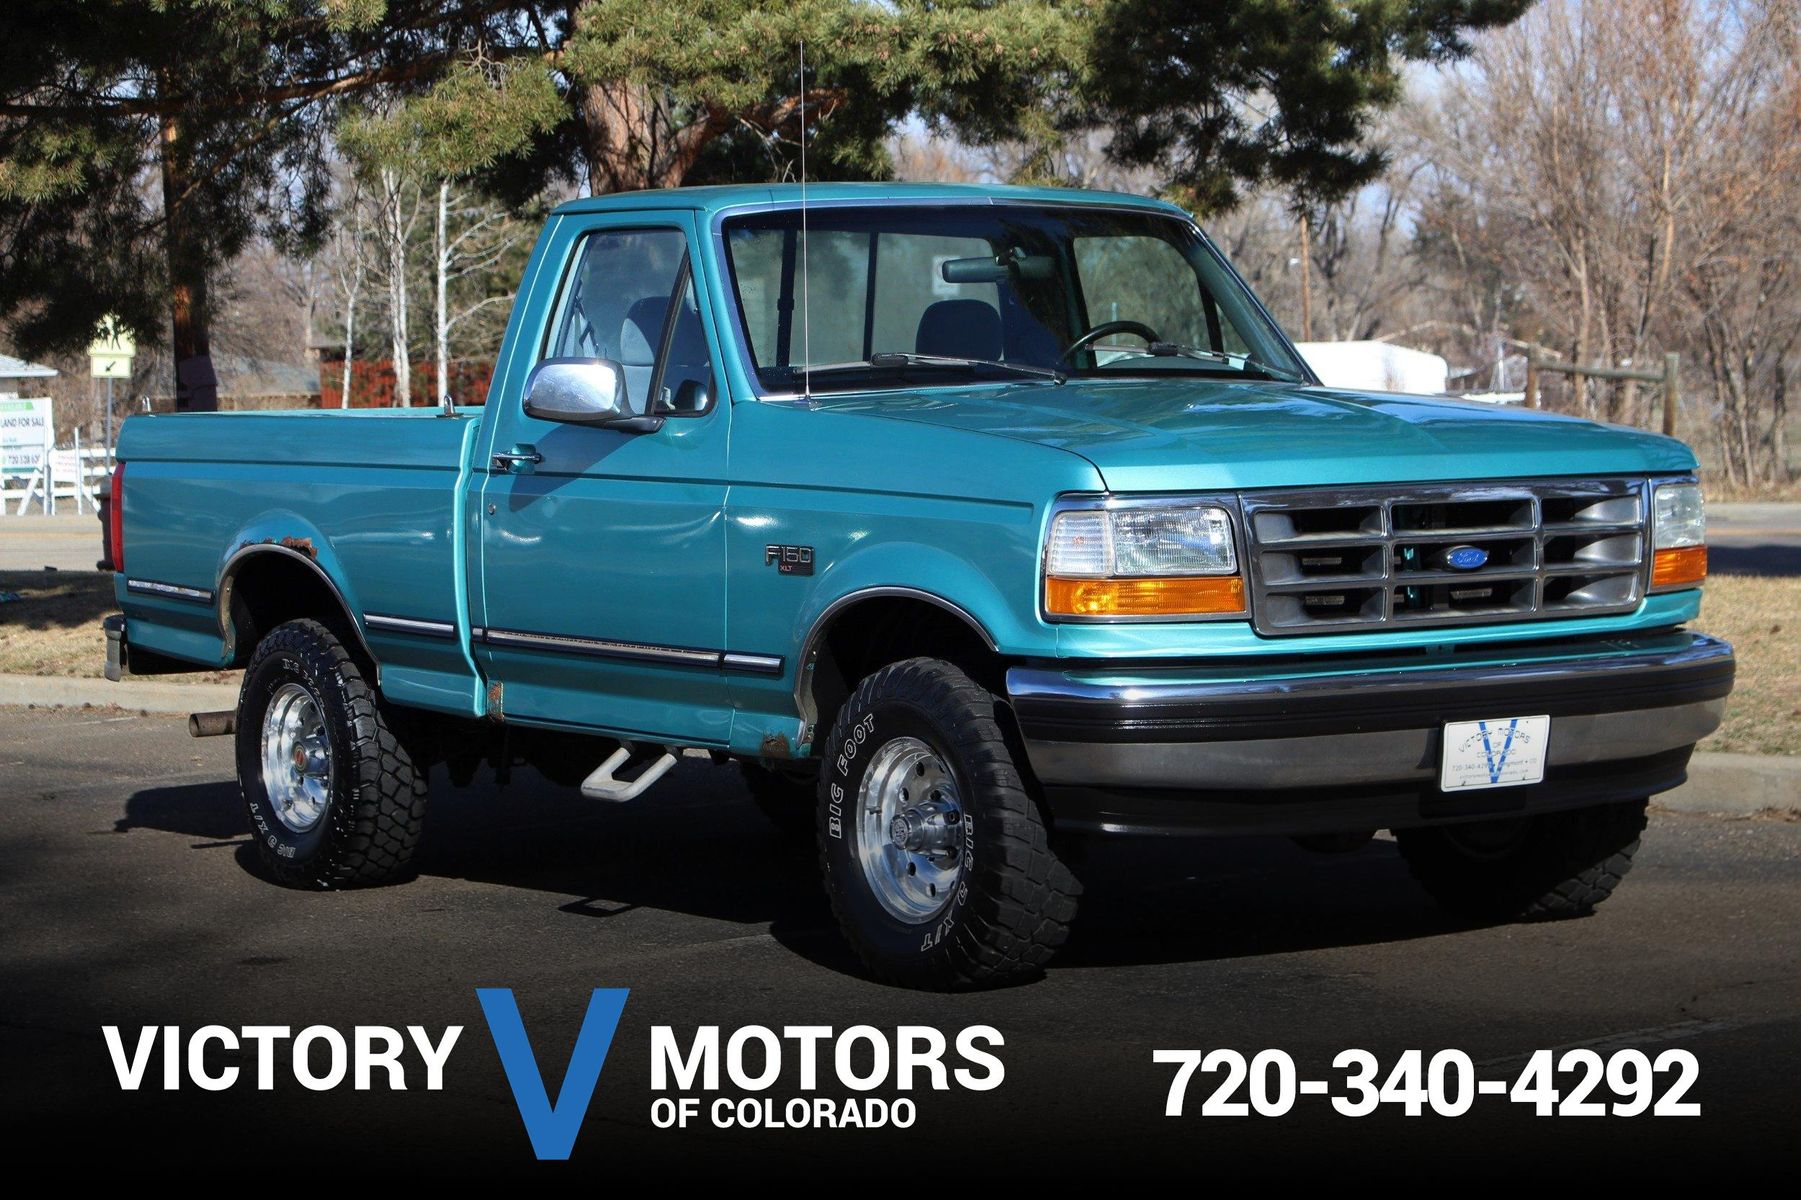 1994 Ford F-150 XLT | Victory Motors of Colorado